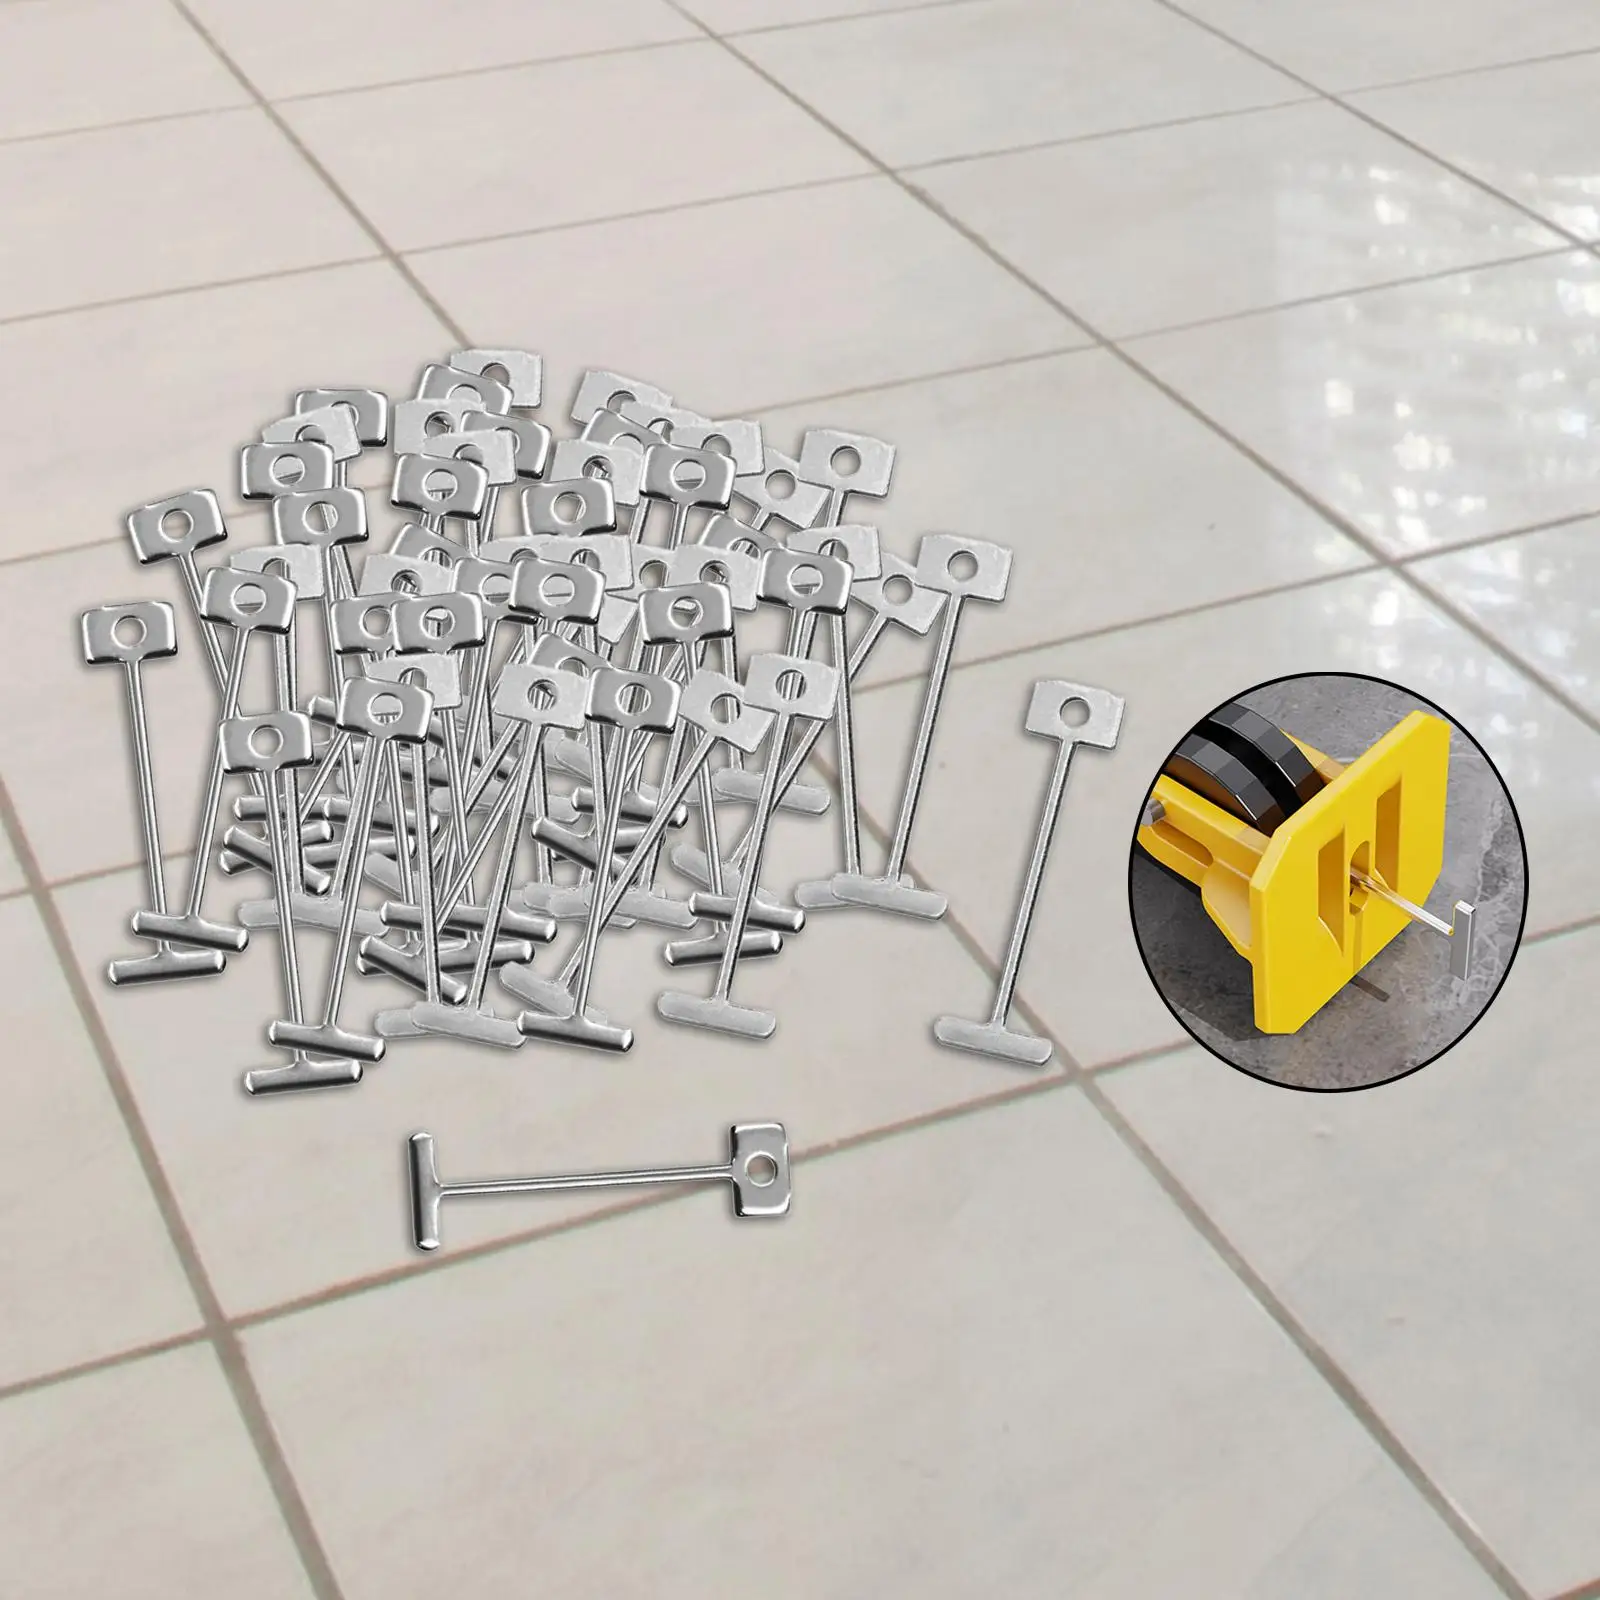 50Pcs 1.5mm T Pins Positioning Artifact Reusable Clip Positioning Replacement Tile Leveling System for Tiling Construction Tools